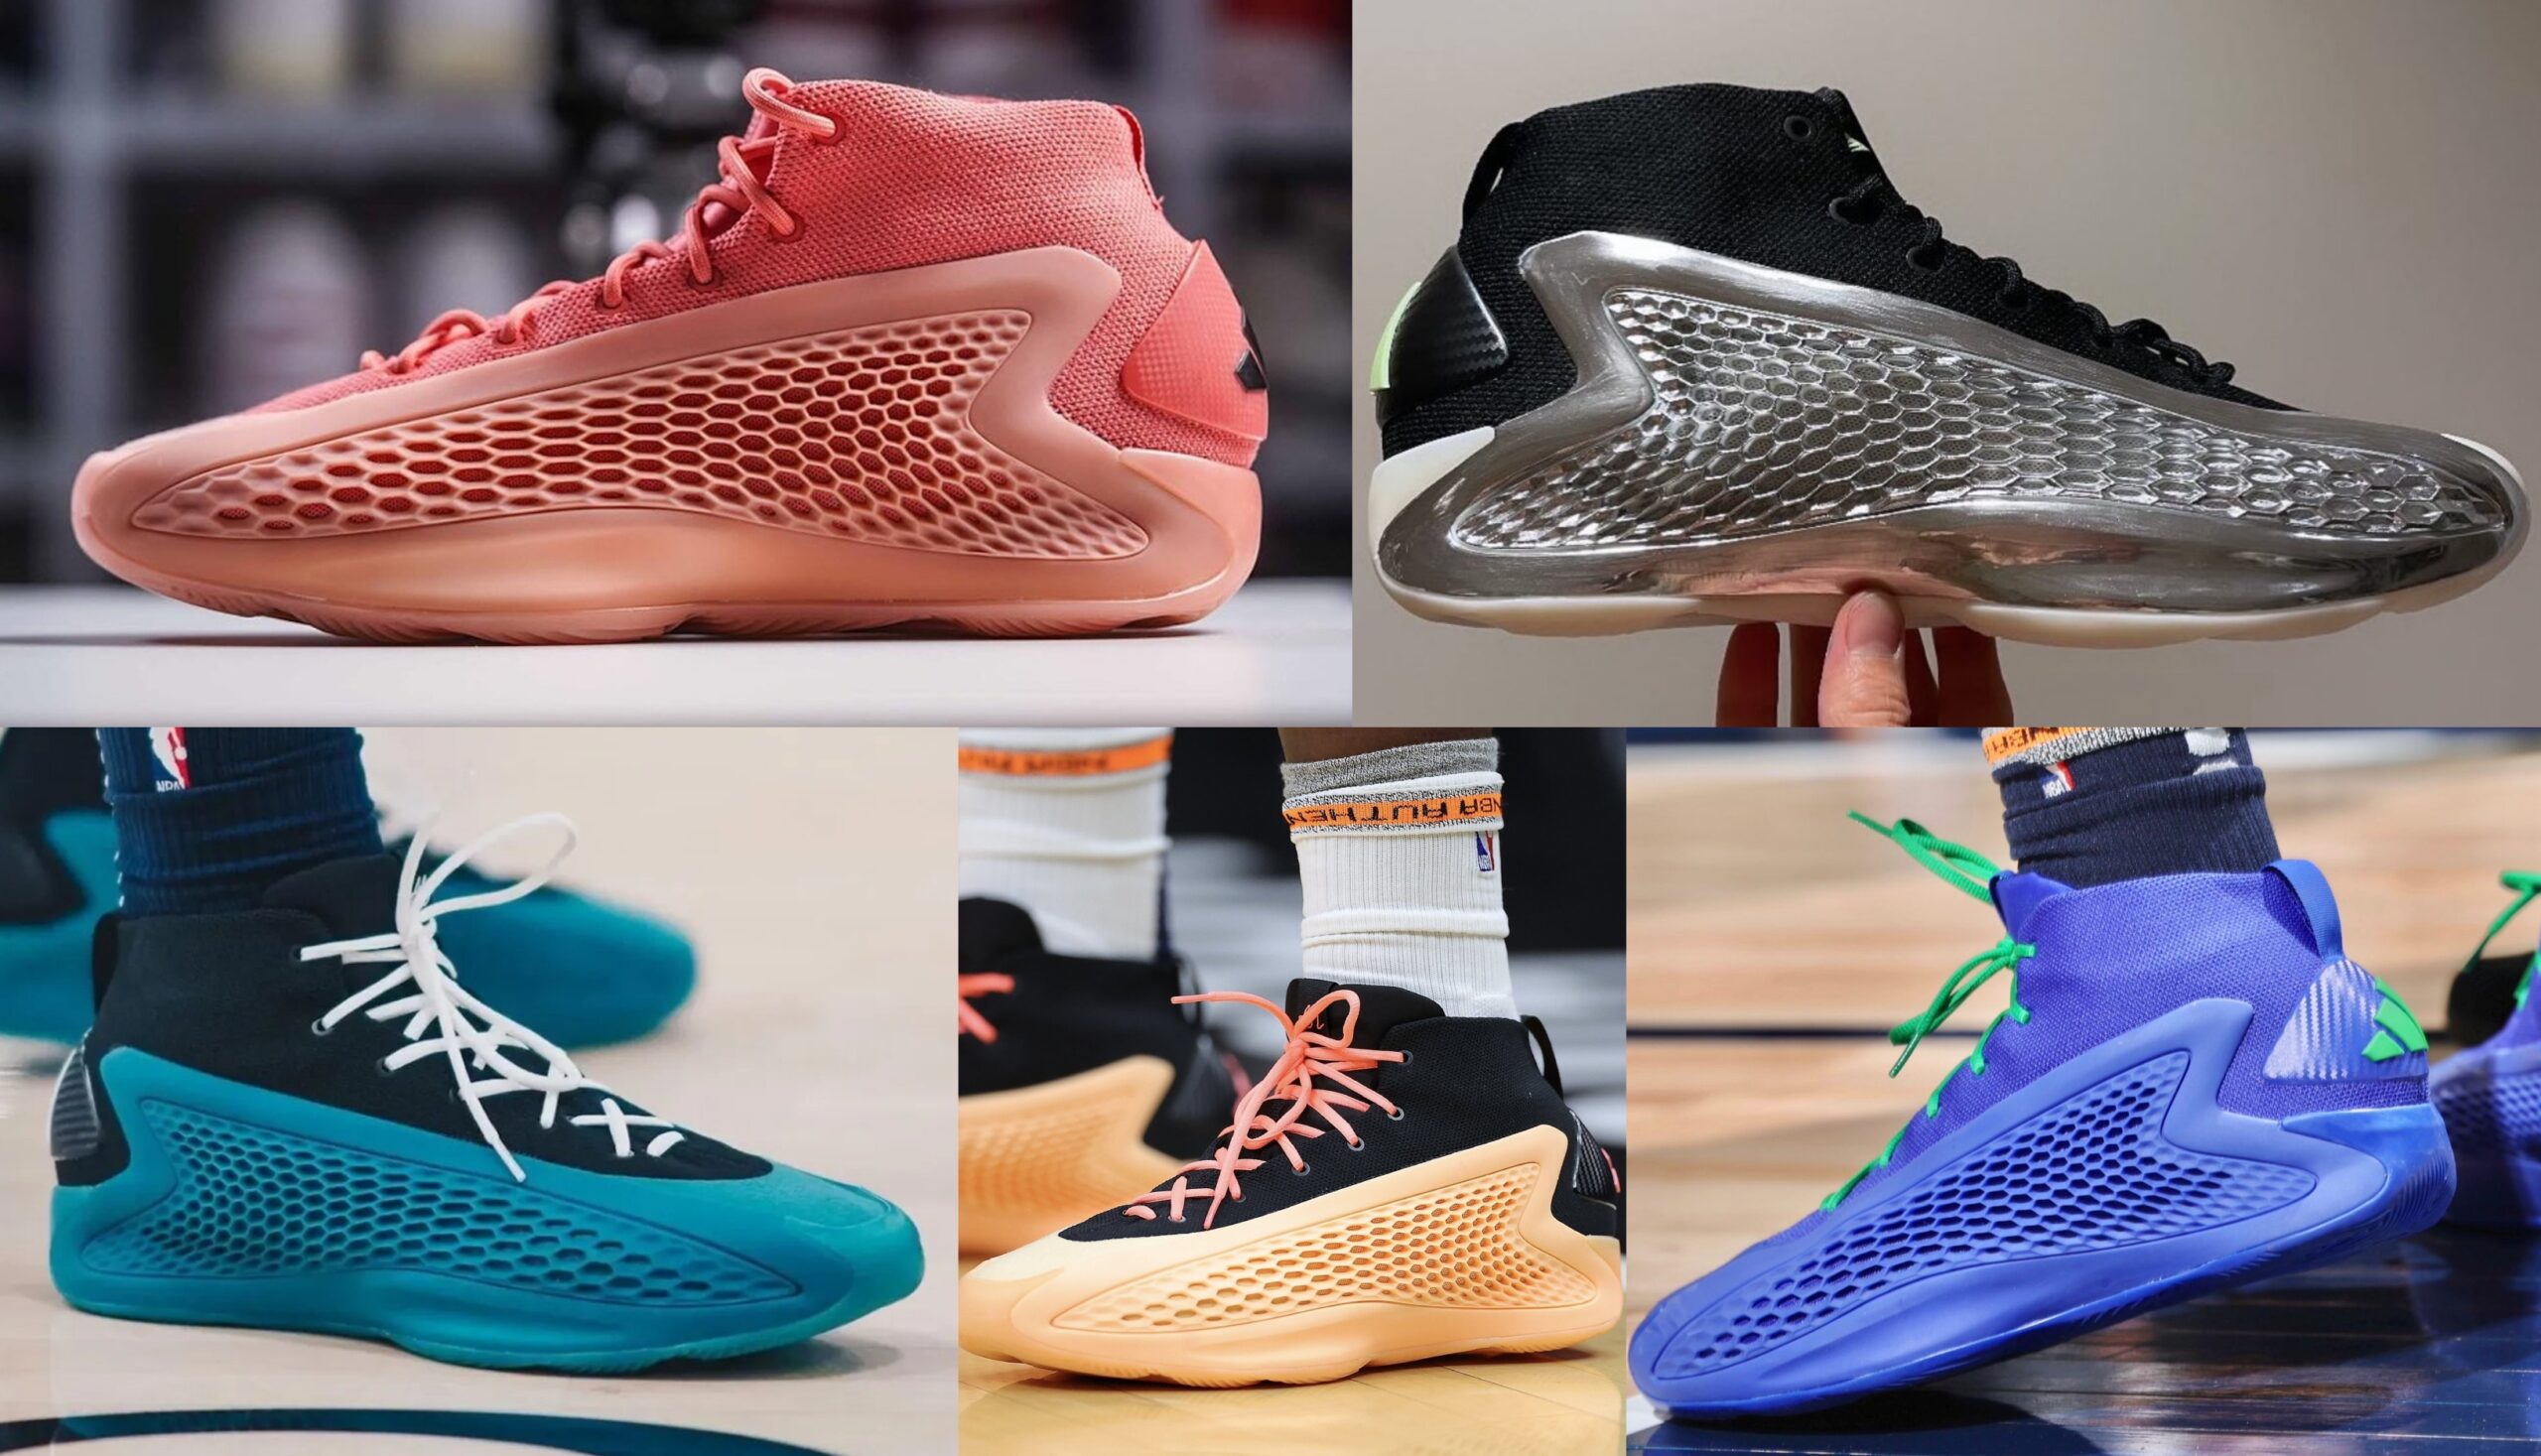 Why is the adidas AE 1 Generating So Much Buzz?